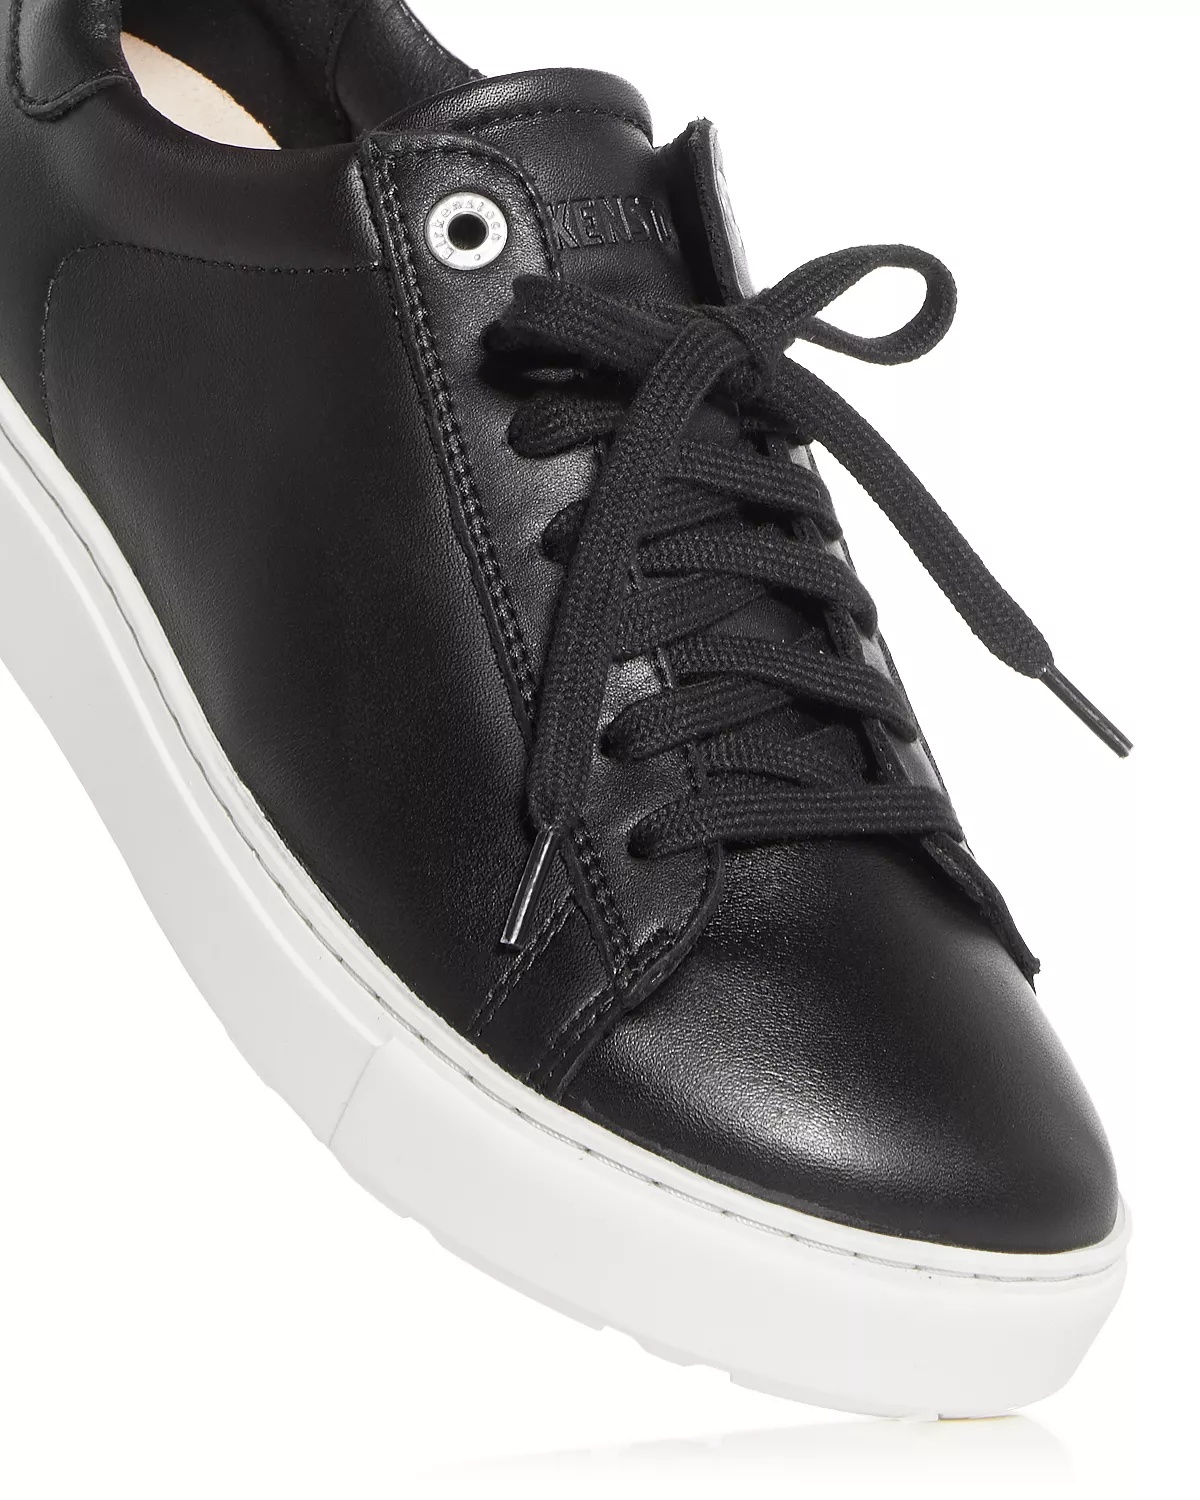 Women's Bend  Lace Up Sneakers - 5